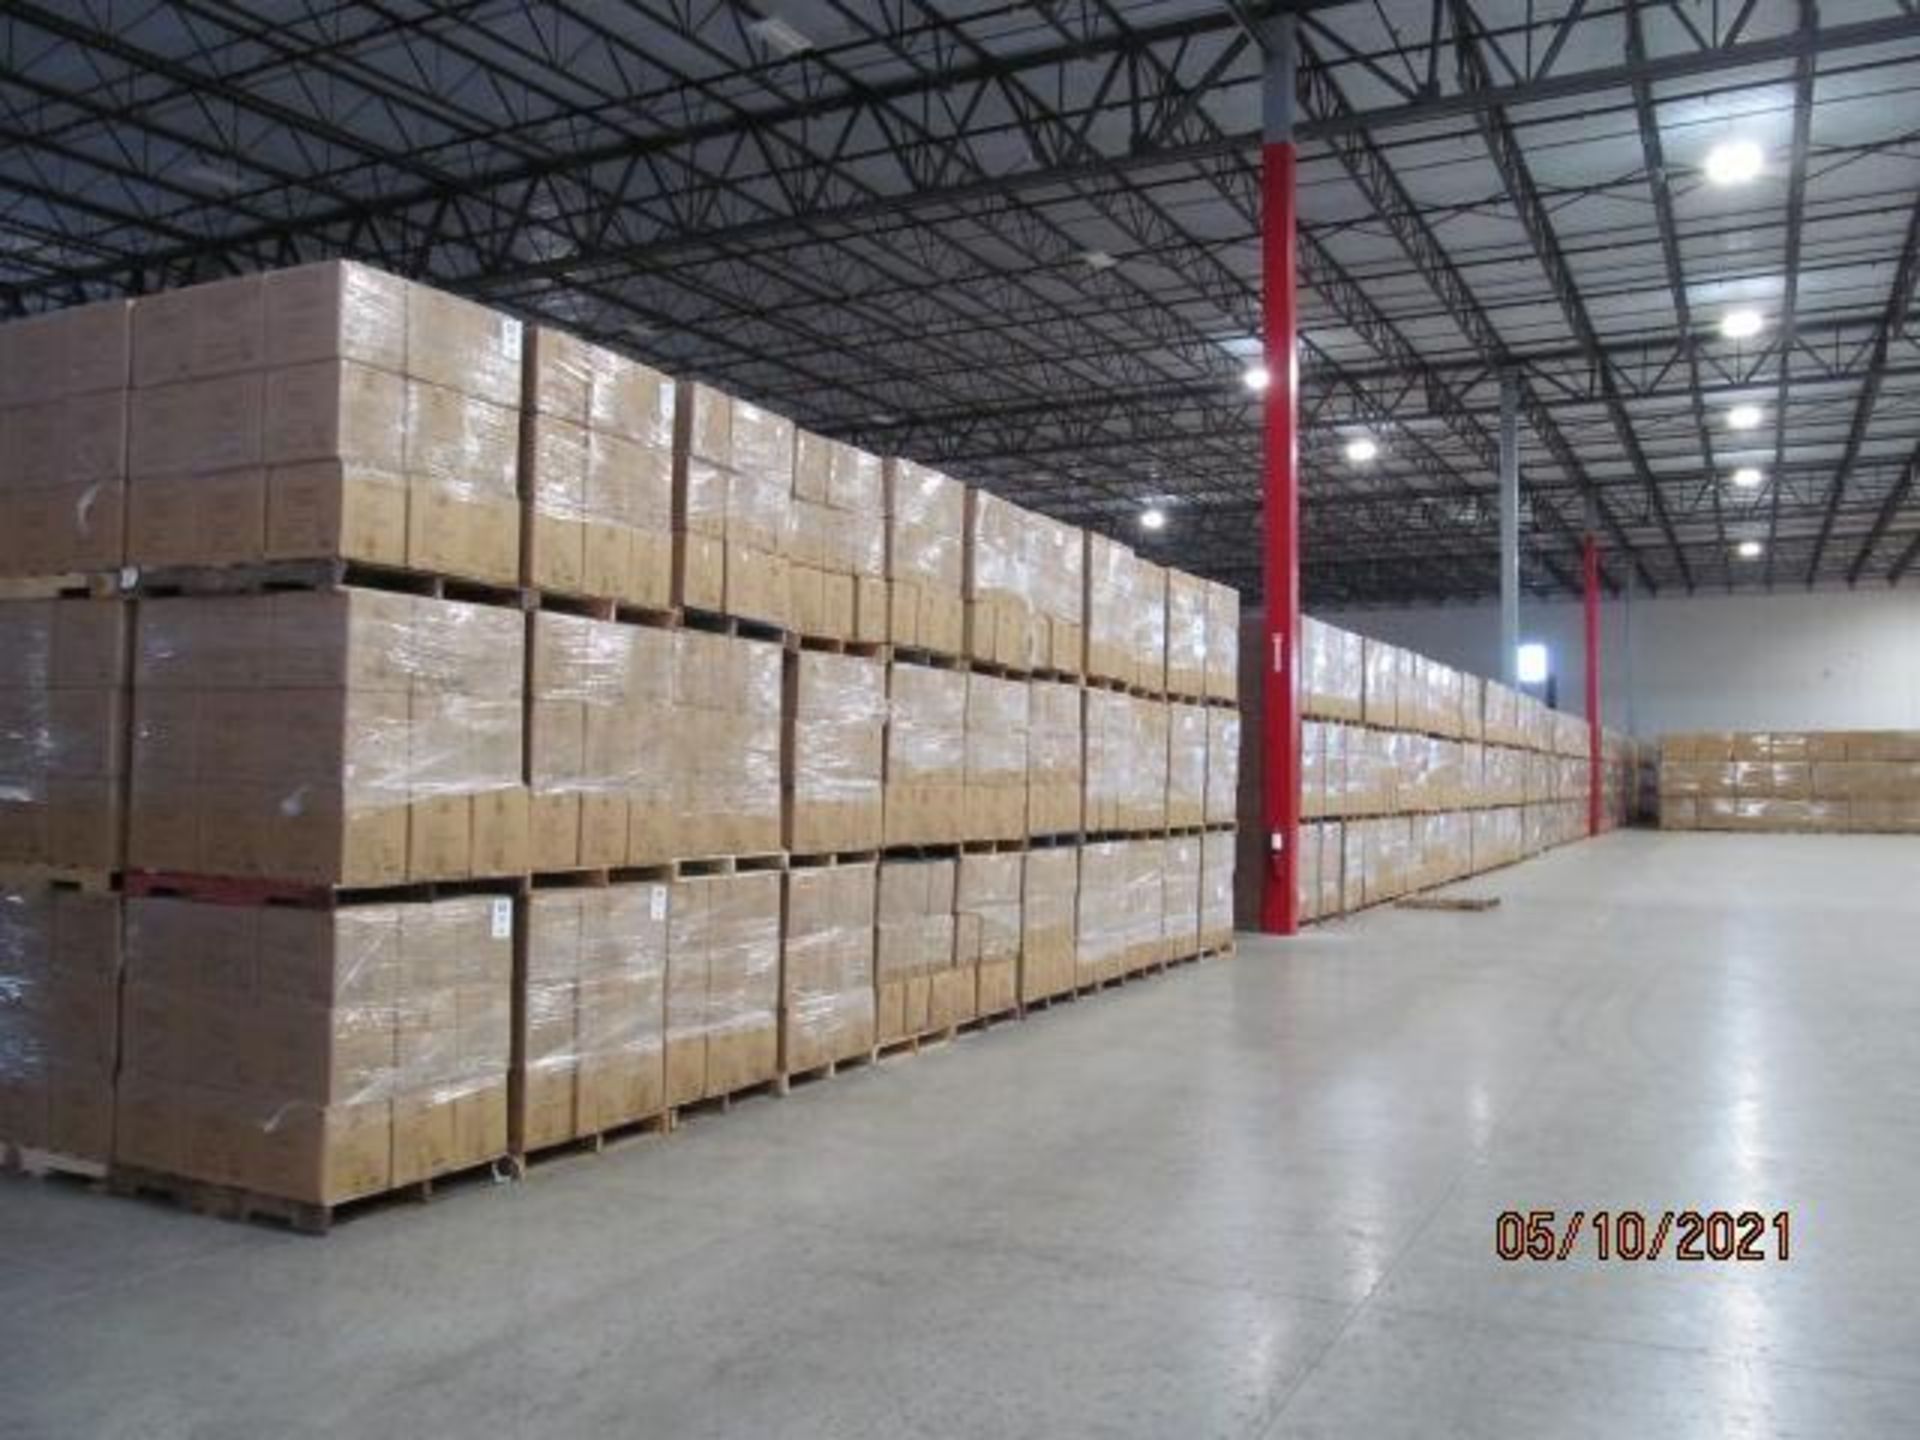 Lot of Waxman Kleen Freak Sanitizing Wipes consisting of 134,784 packages on 208 pallets. Each packa - Image 8 of 11